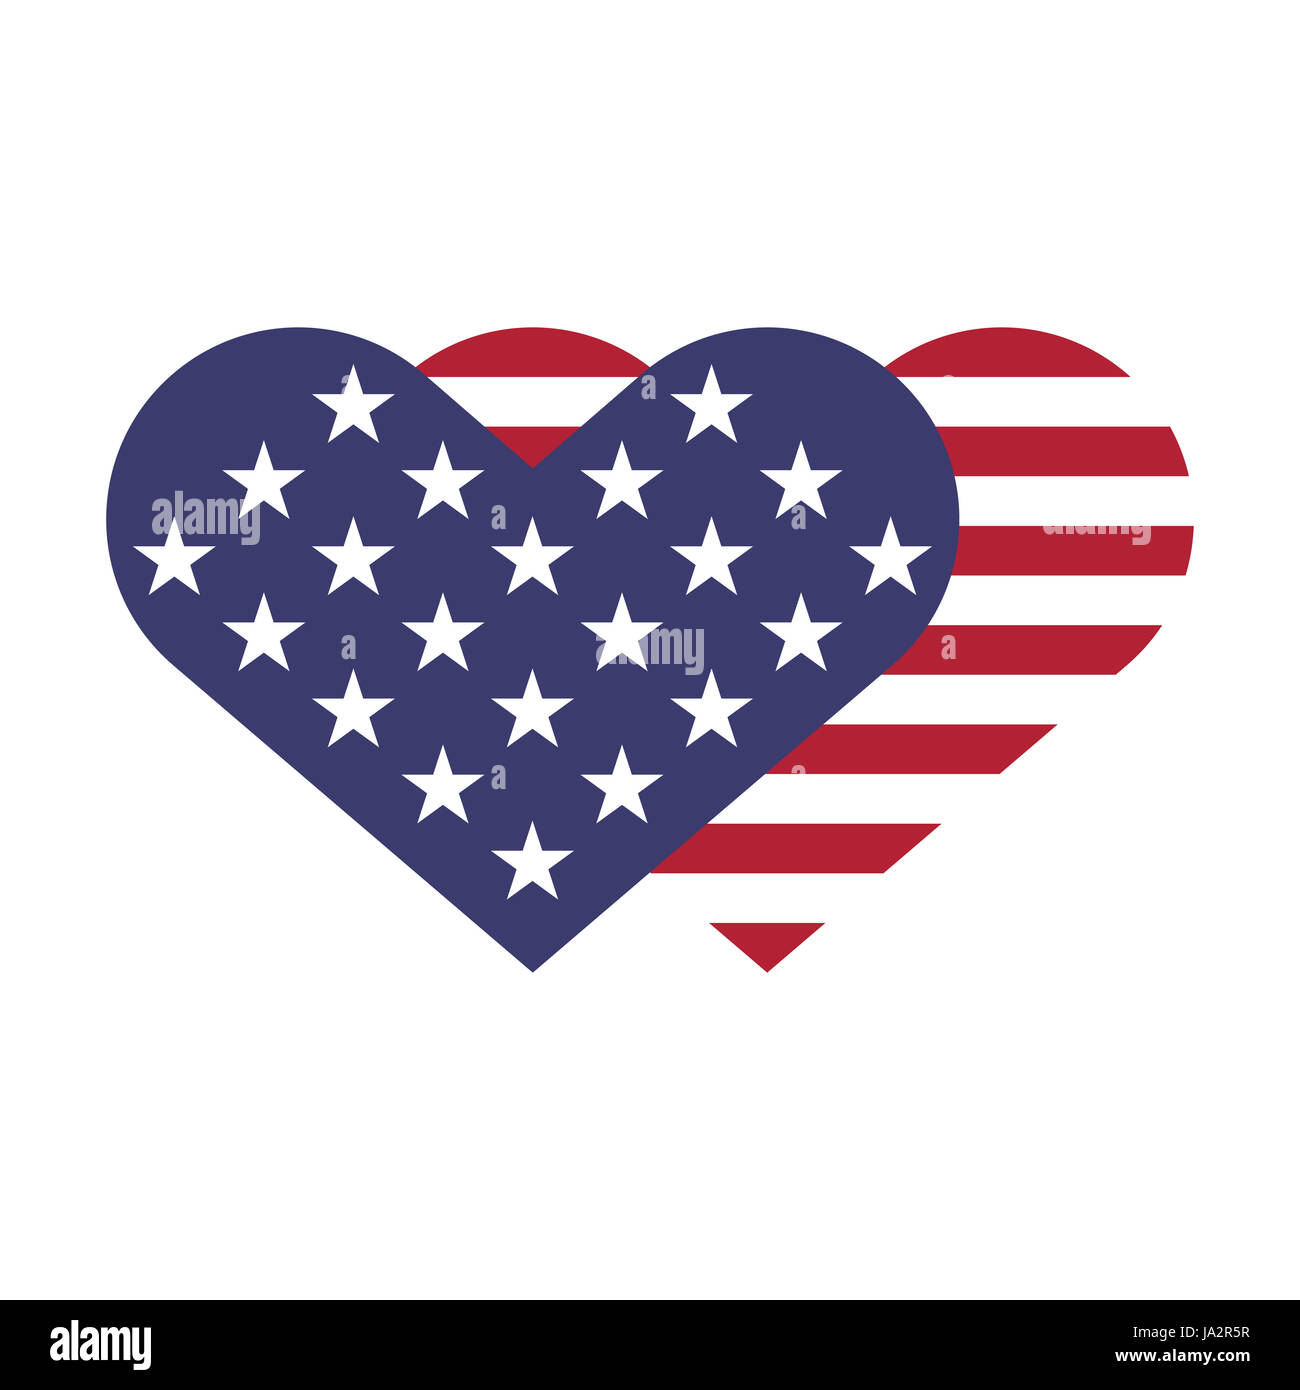 USA flag hearts shape vector illustration for Independence Day, Memorial Day or others Stock Photo